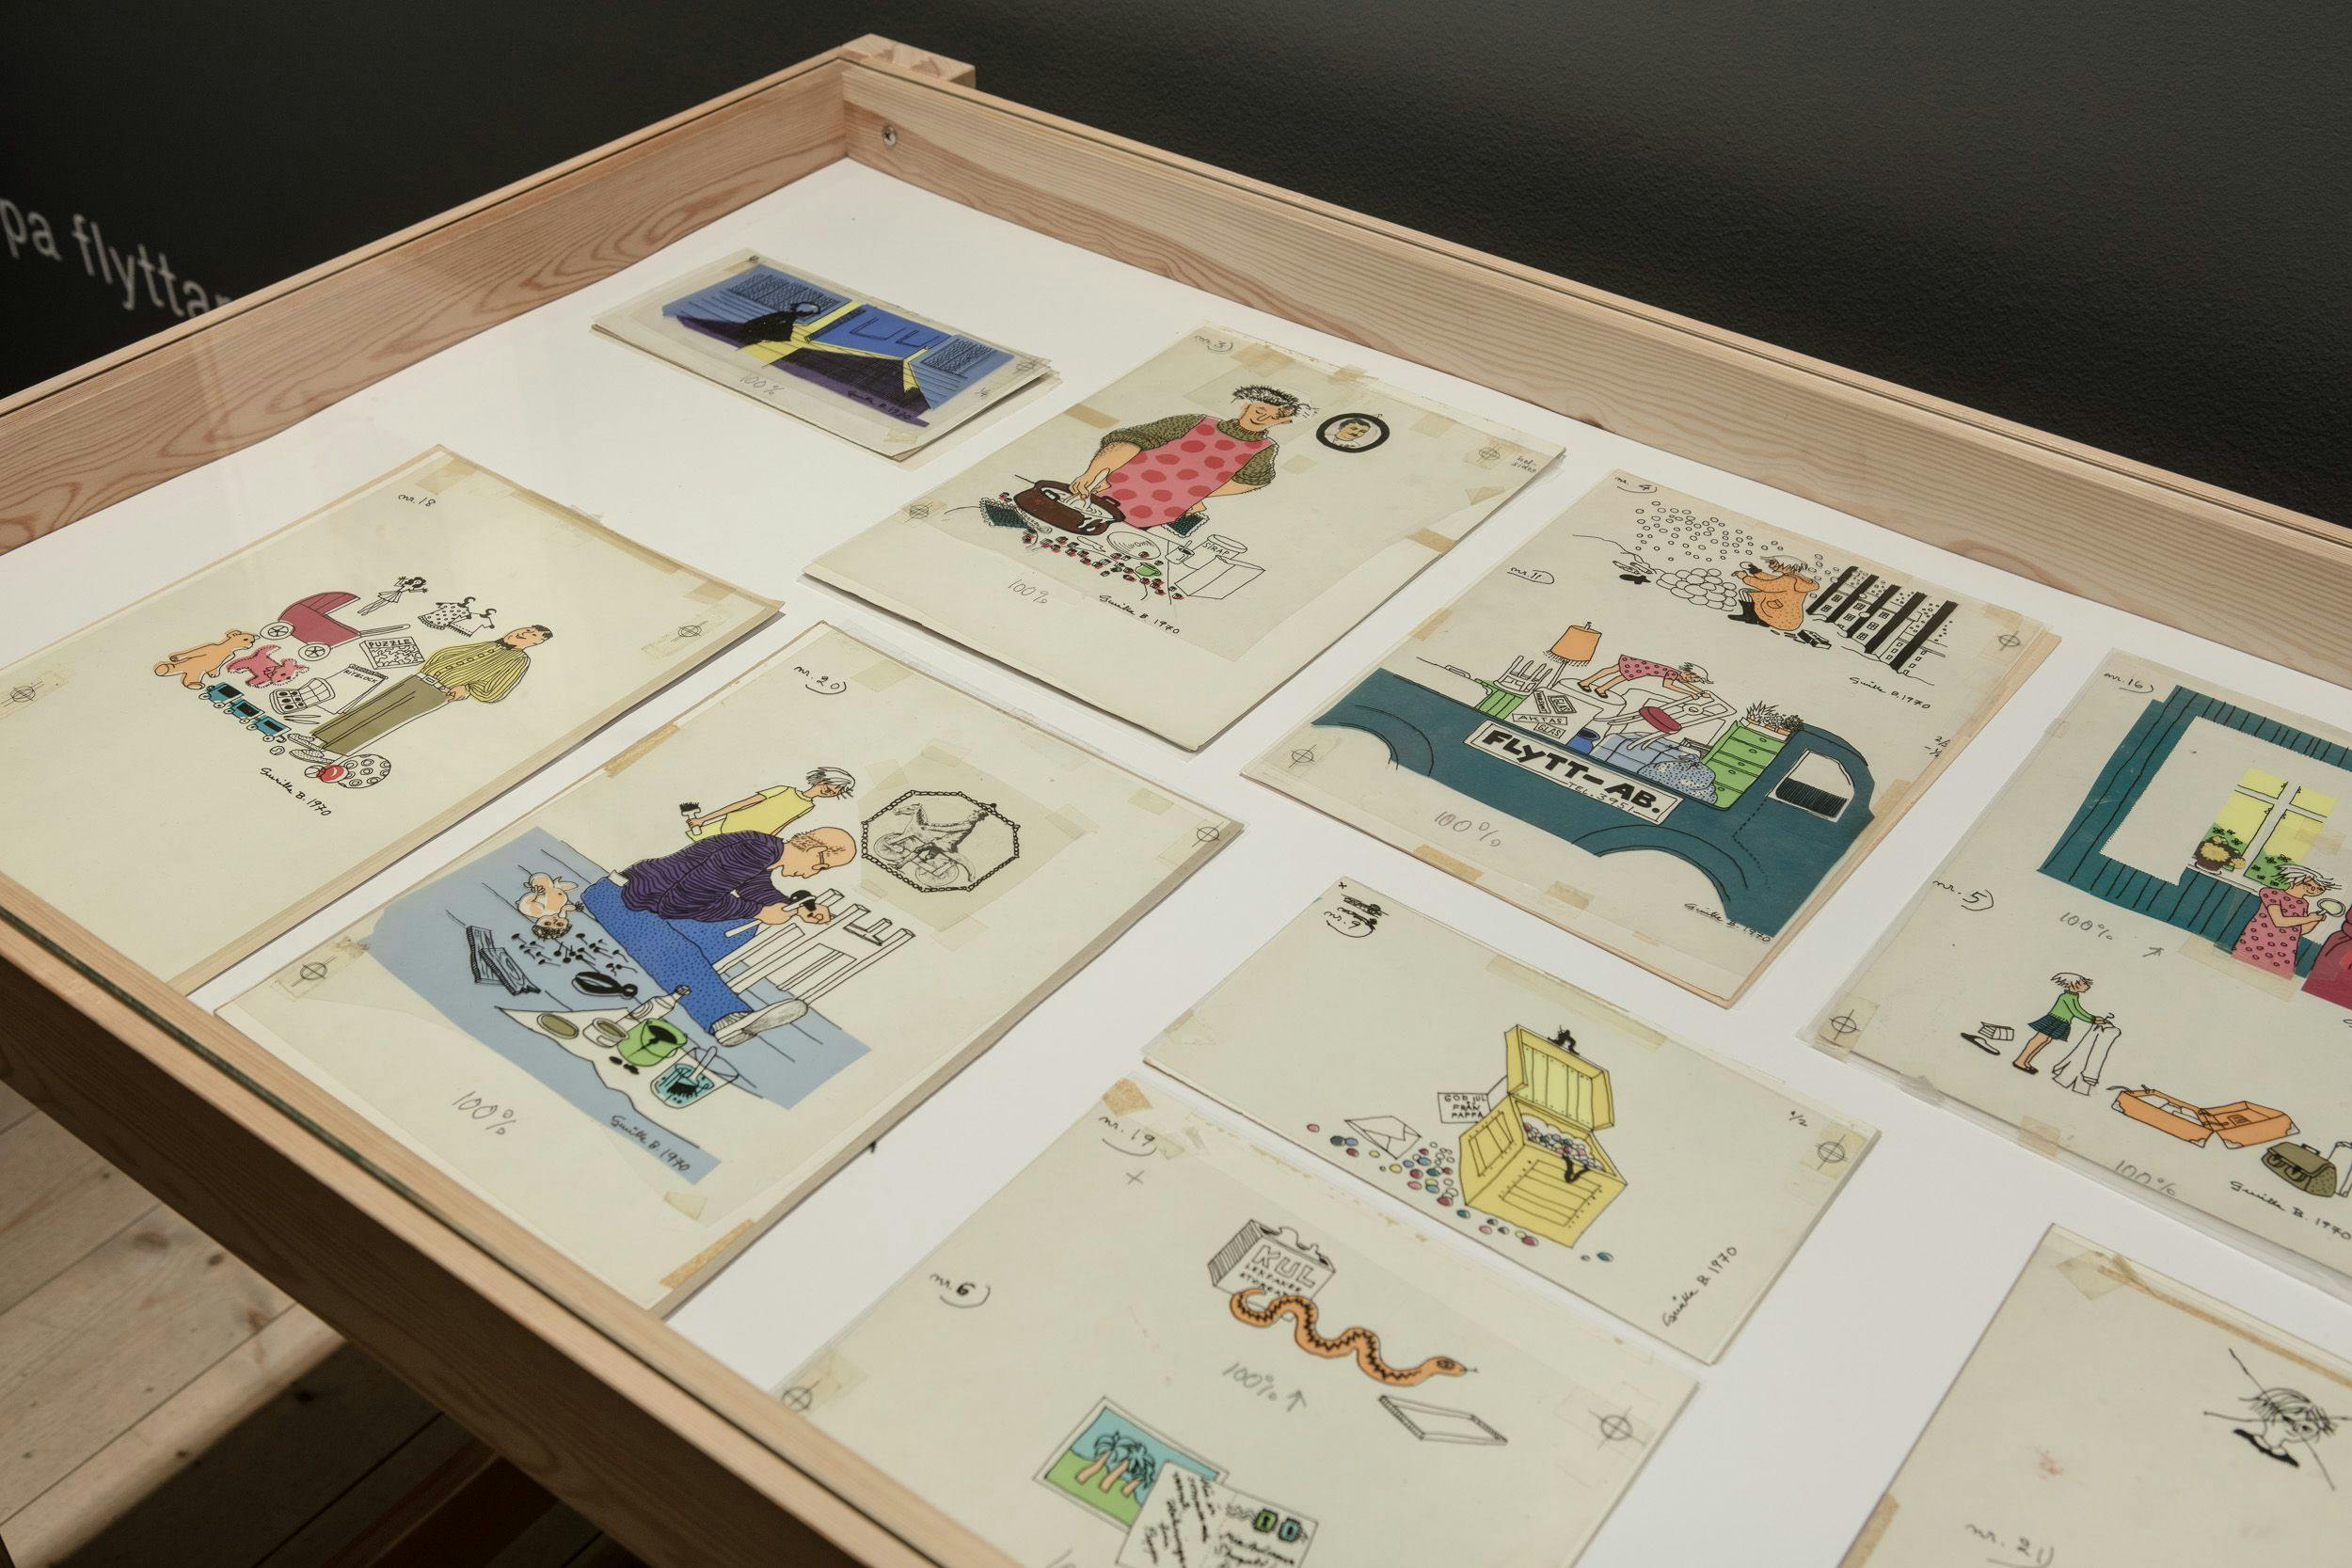 Close-up of pictures in show case, sketches from the book Bill and Bolla